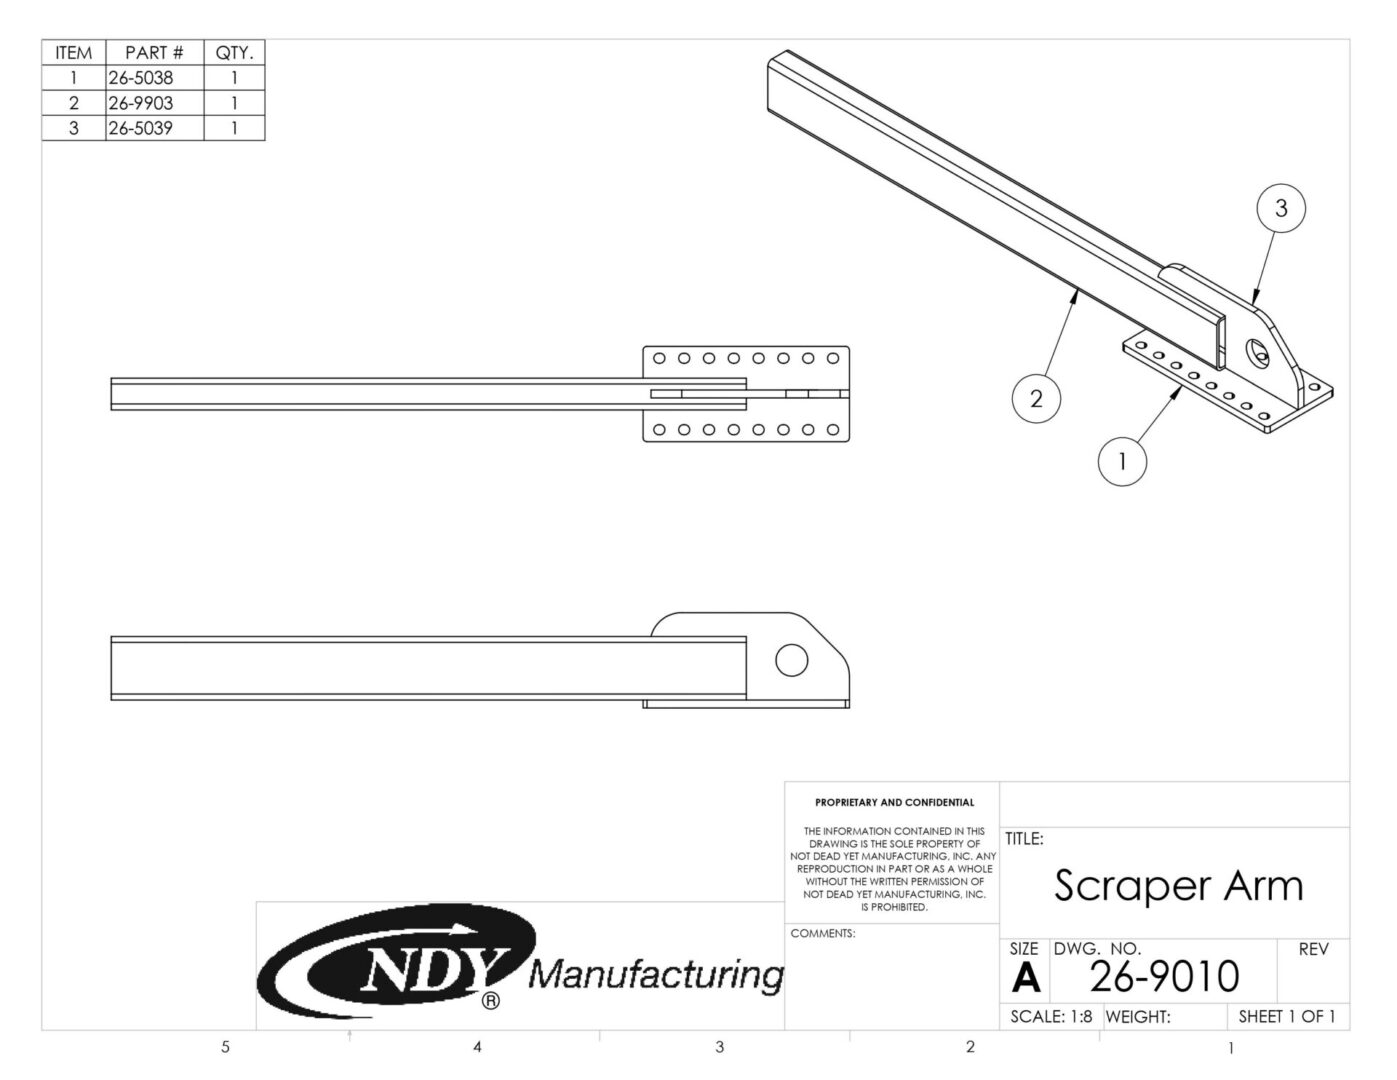 A drawing showing the parts of a Mud Scraper arm.